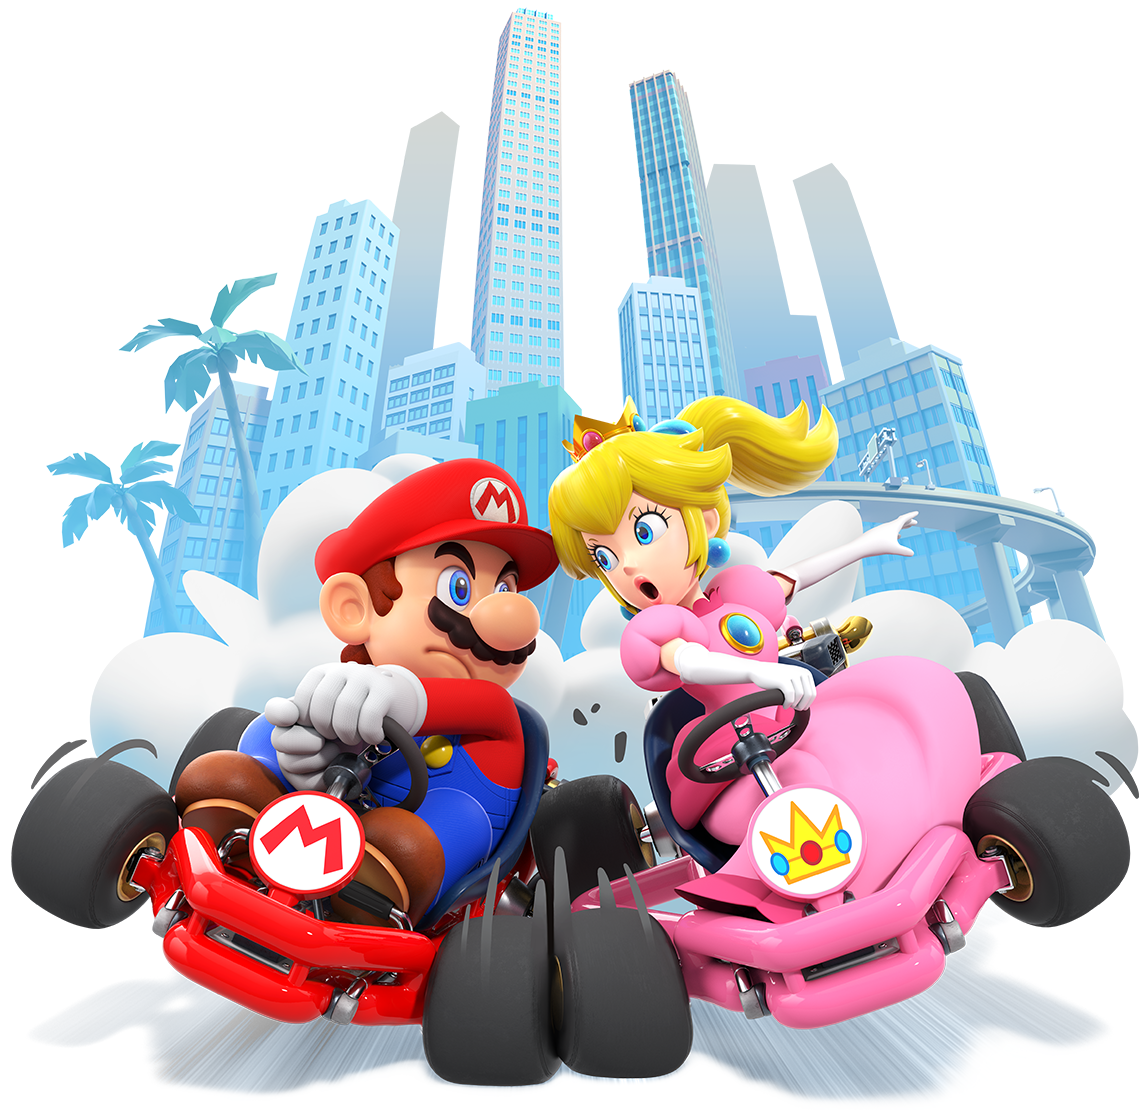 MKT_Mario_and_Peach_artwork.png